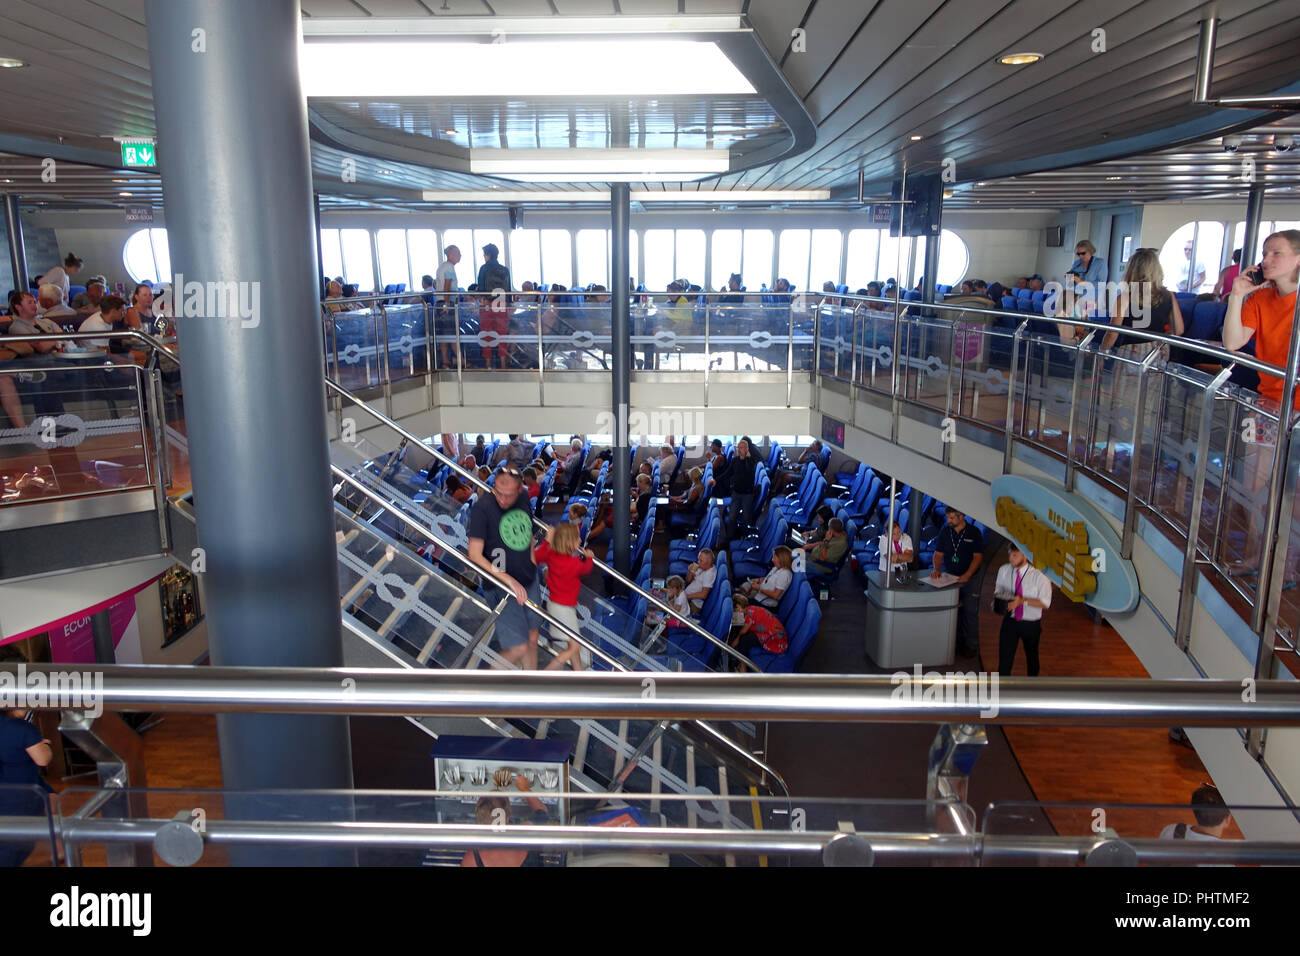 Interior of a condor ferry between St malo and Jersey Stock Photo - Alamy